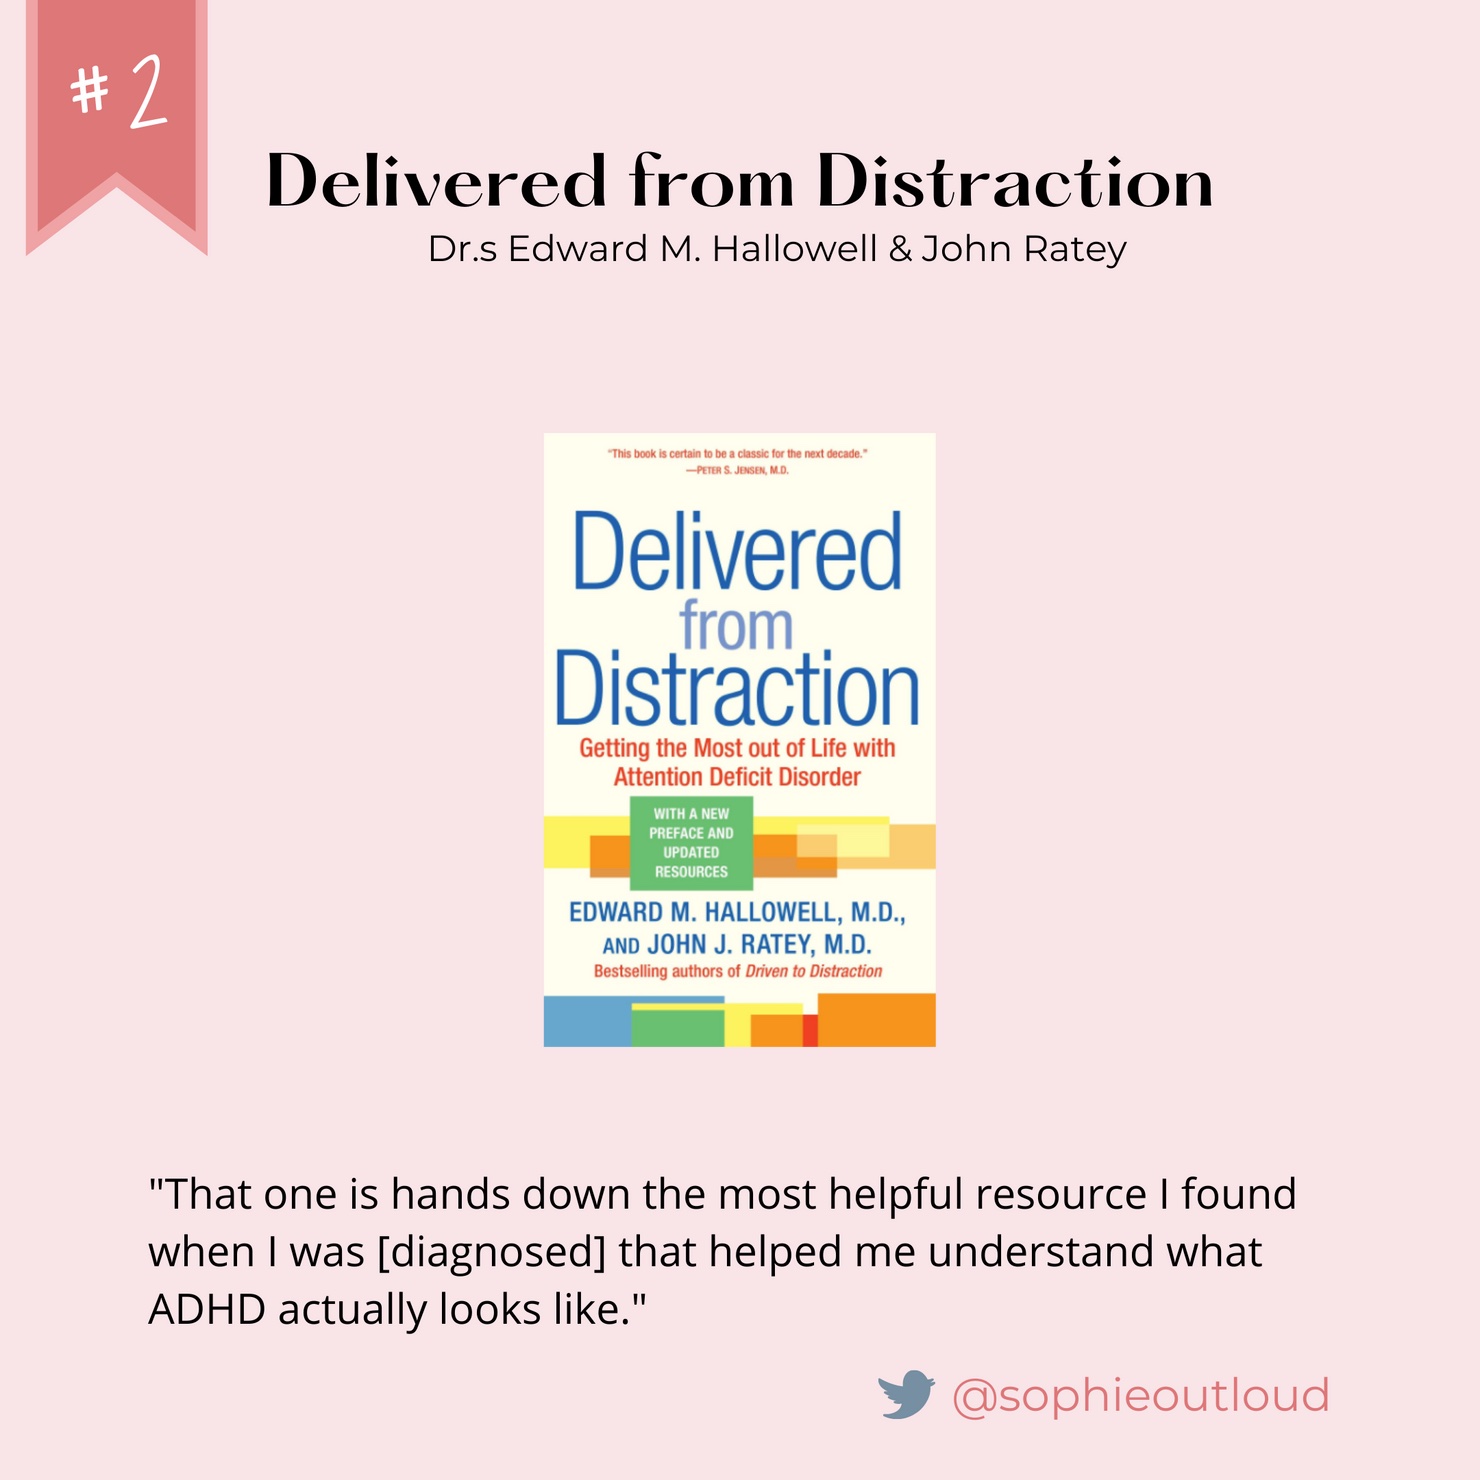 Number 2: Delivered from Distraction. Written by Dr. Edward Hallowell and Dr. John Ratey. Quote from @sophieoutloud on Twitter: "That one is hands down the most helpful resource I found when I was [diagnosed] that helped me understand what ADHD actually looks like."